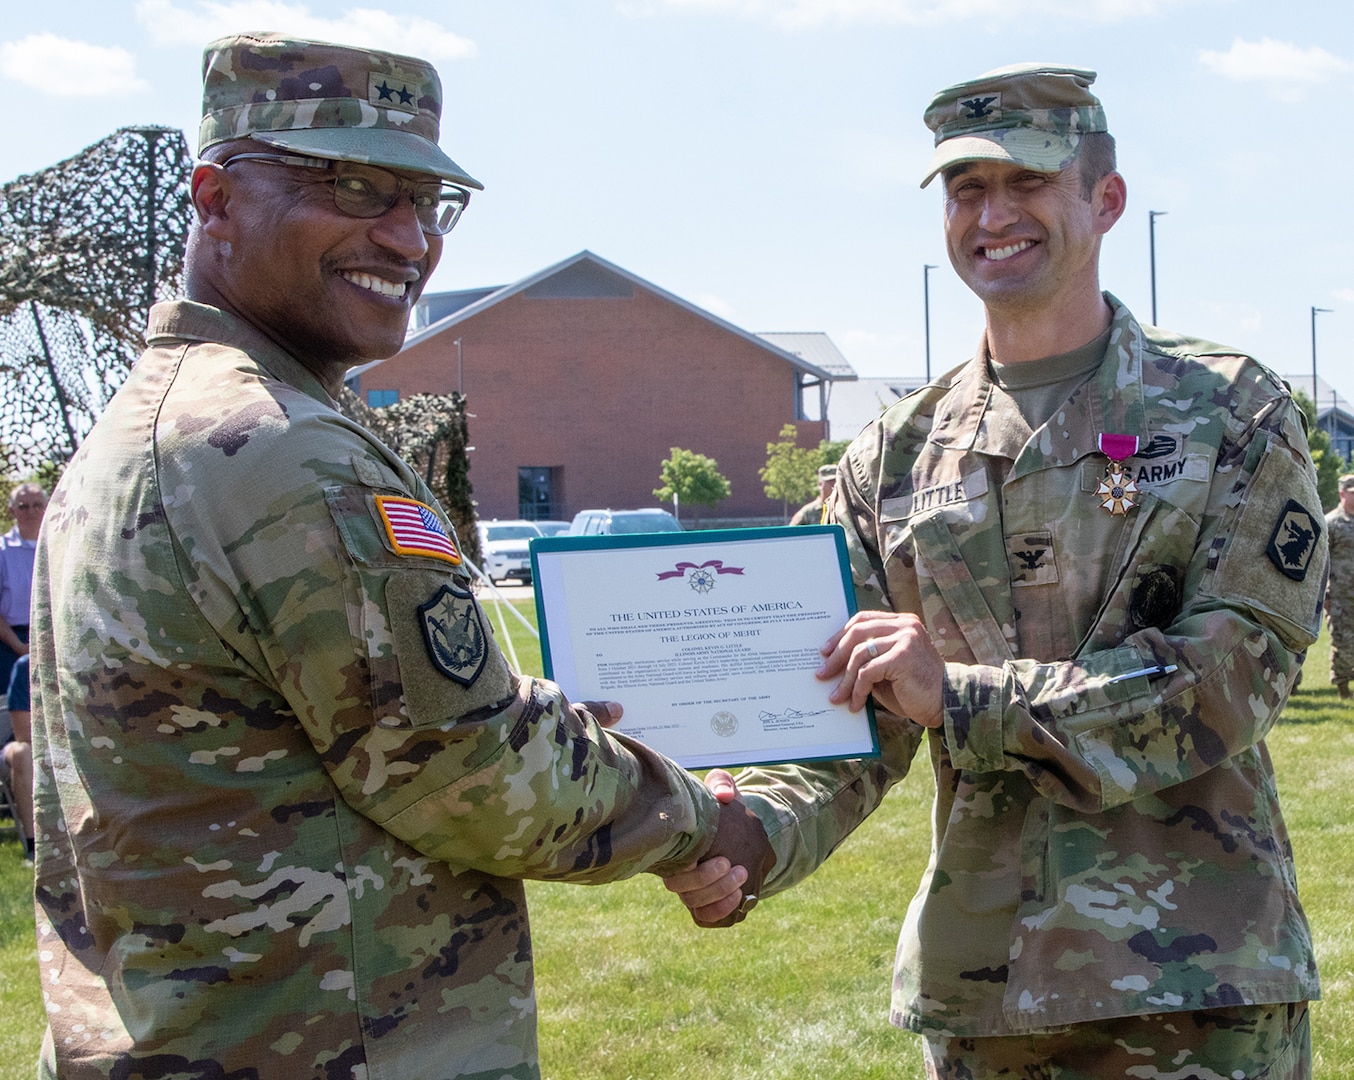 Col. Kevin Little, of Franklin, Illinois, outgoing Commander of the 404th Maneuver Enhancement Brigade, is presented with the Legion of Merit by Maj. Gen. Rodney Boyd, of Naperville, Illinois, Assistant Adjutant General – Army and Commander of the Illinois Army National Guard, during the change of command ceremony July 14 at the brigade’s headquarters on the campus of Heartland Community College in Normal, Illinois